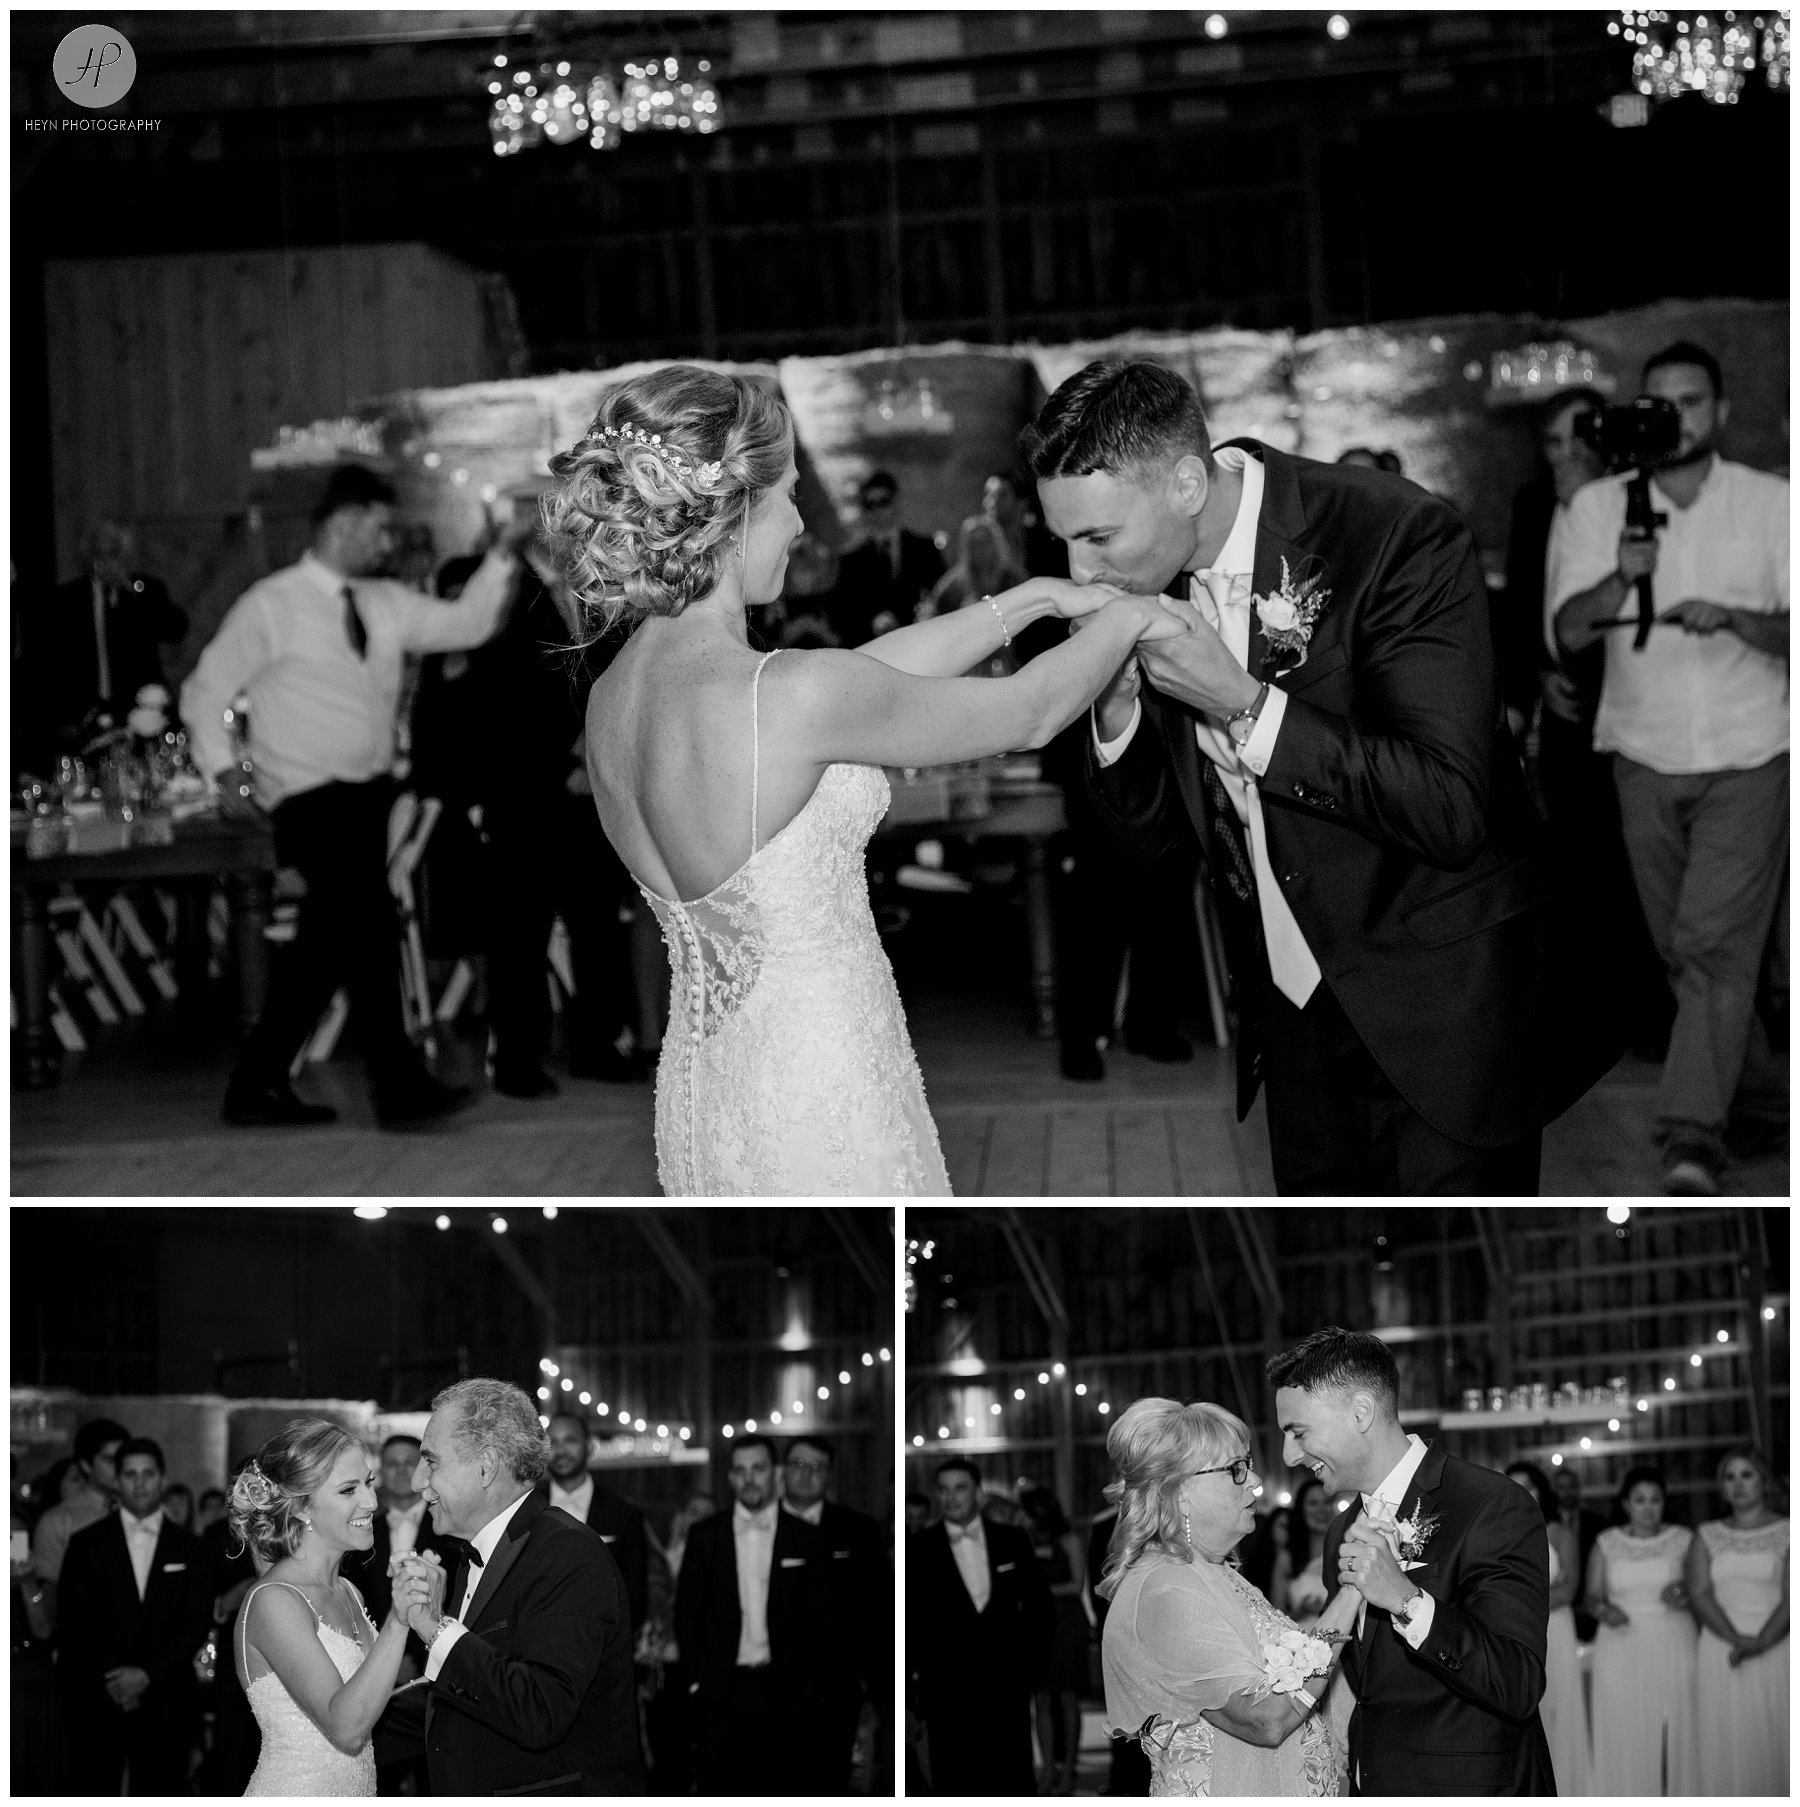 bride and groom first dance at barn reception at stone tavern farm wedding in the catskills new york